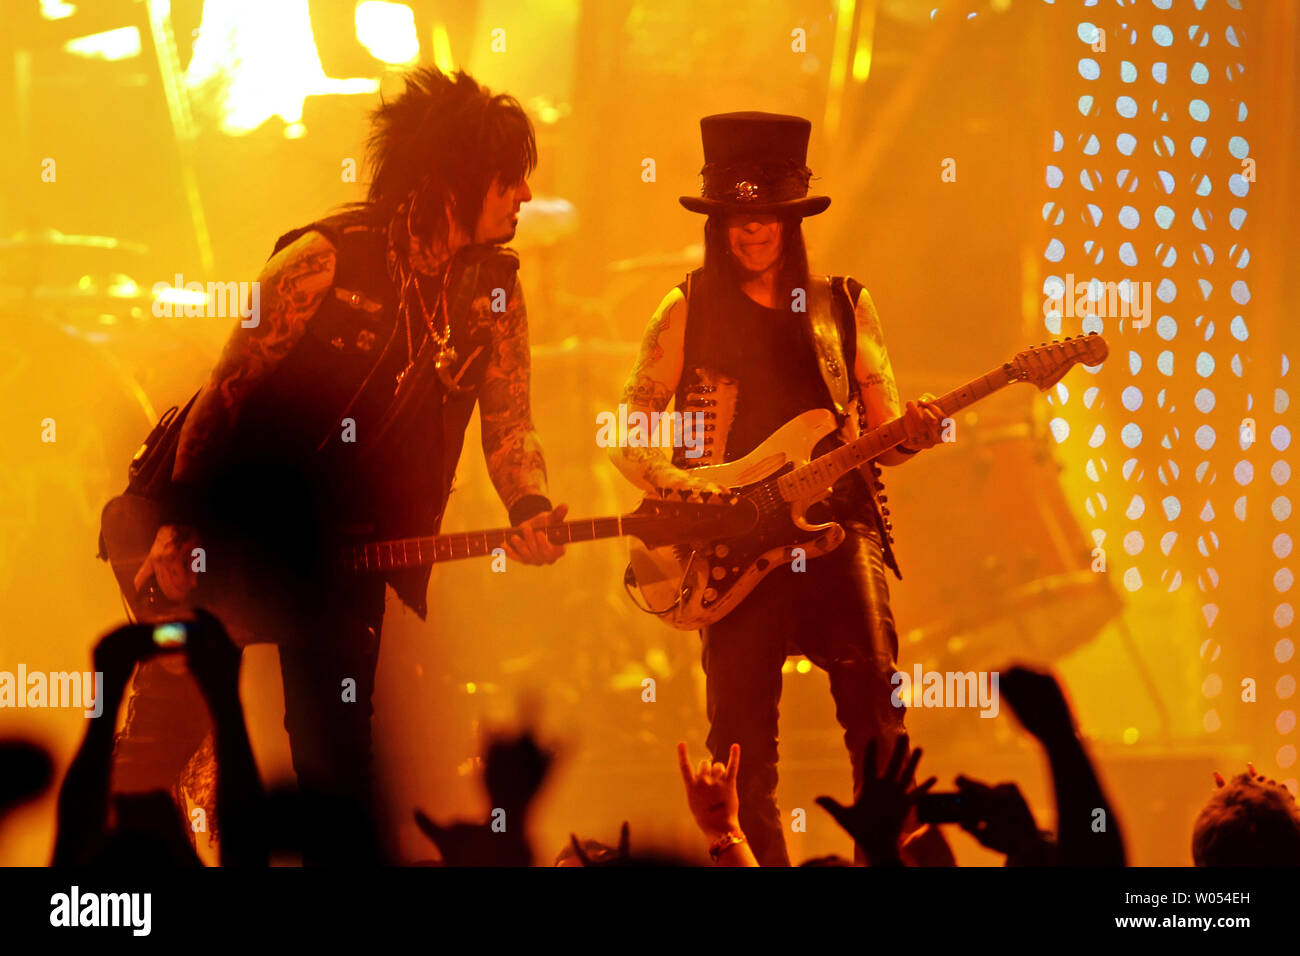 Nikki Sixx (L) and Mick Mars of Motley Crue perform in concert at San Diego State University's Cox Arena on February 2, 2009, kicking off the group's 'Saints of Los Angeles' Tour. The tour celebrates Motley Crue's album of the same name, their first studio album in over a decade to feature the original members.    (UPI Photo/Roger Williams) Stock Photo